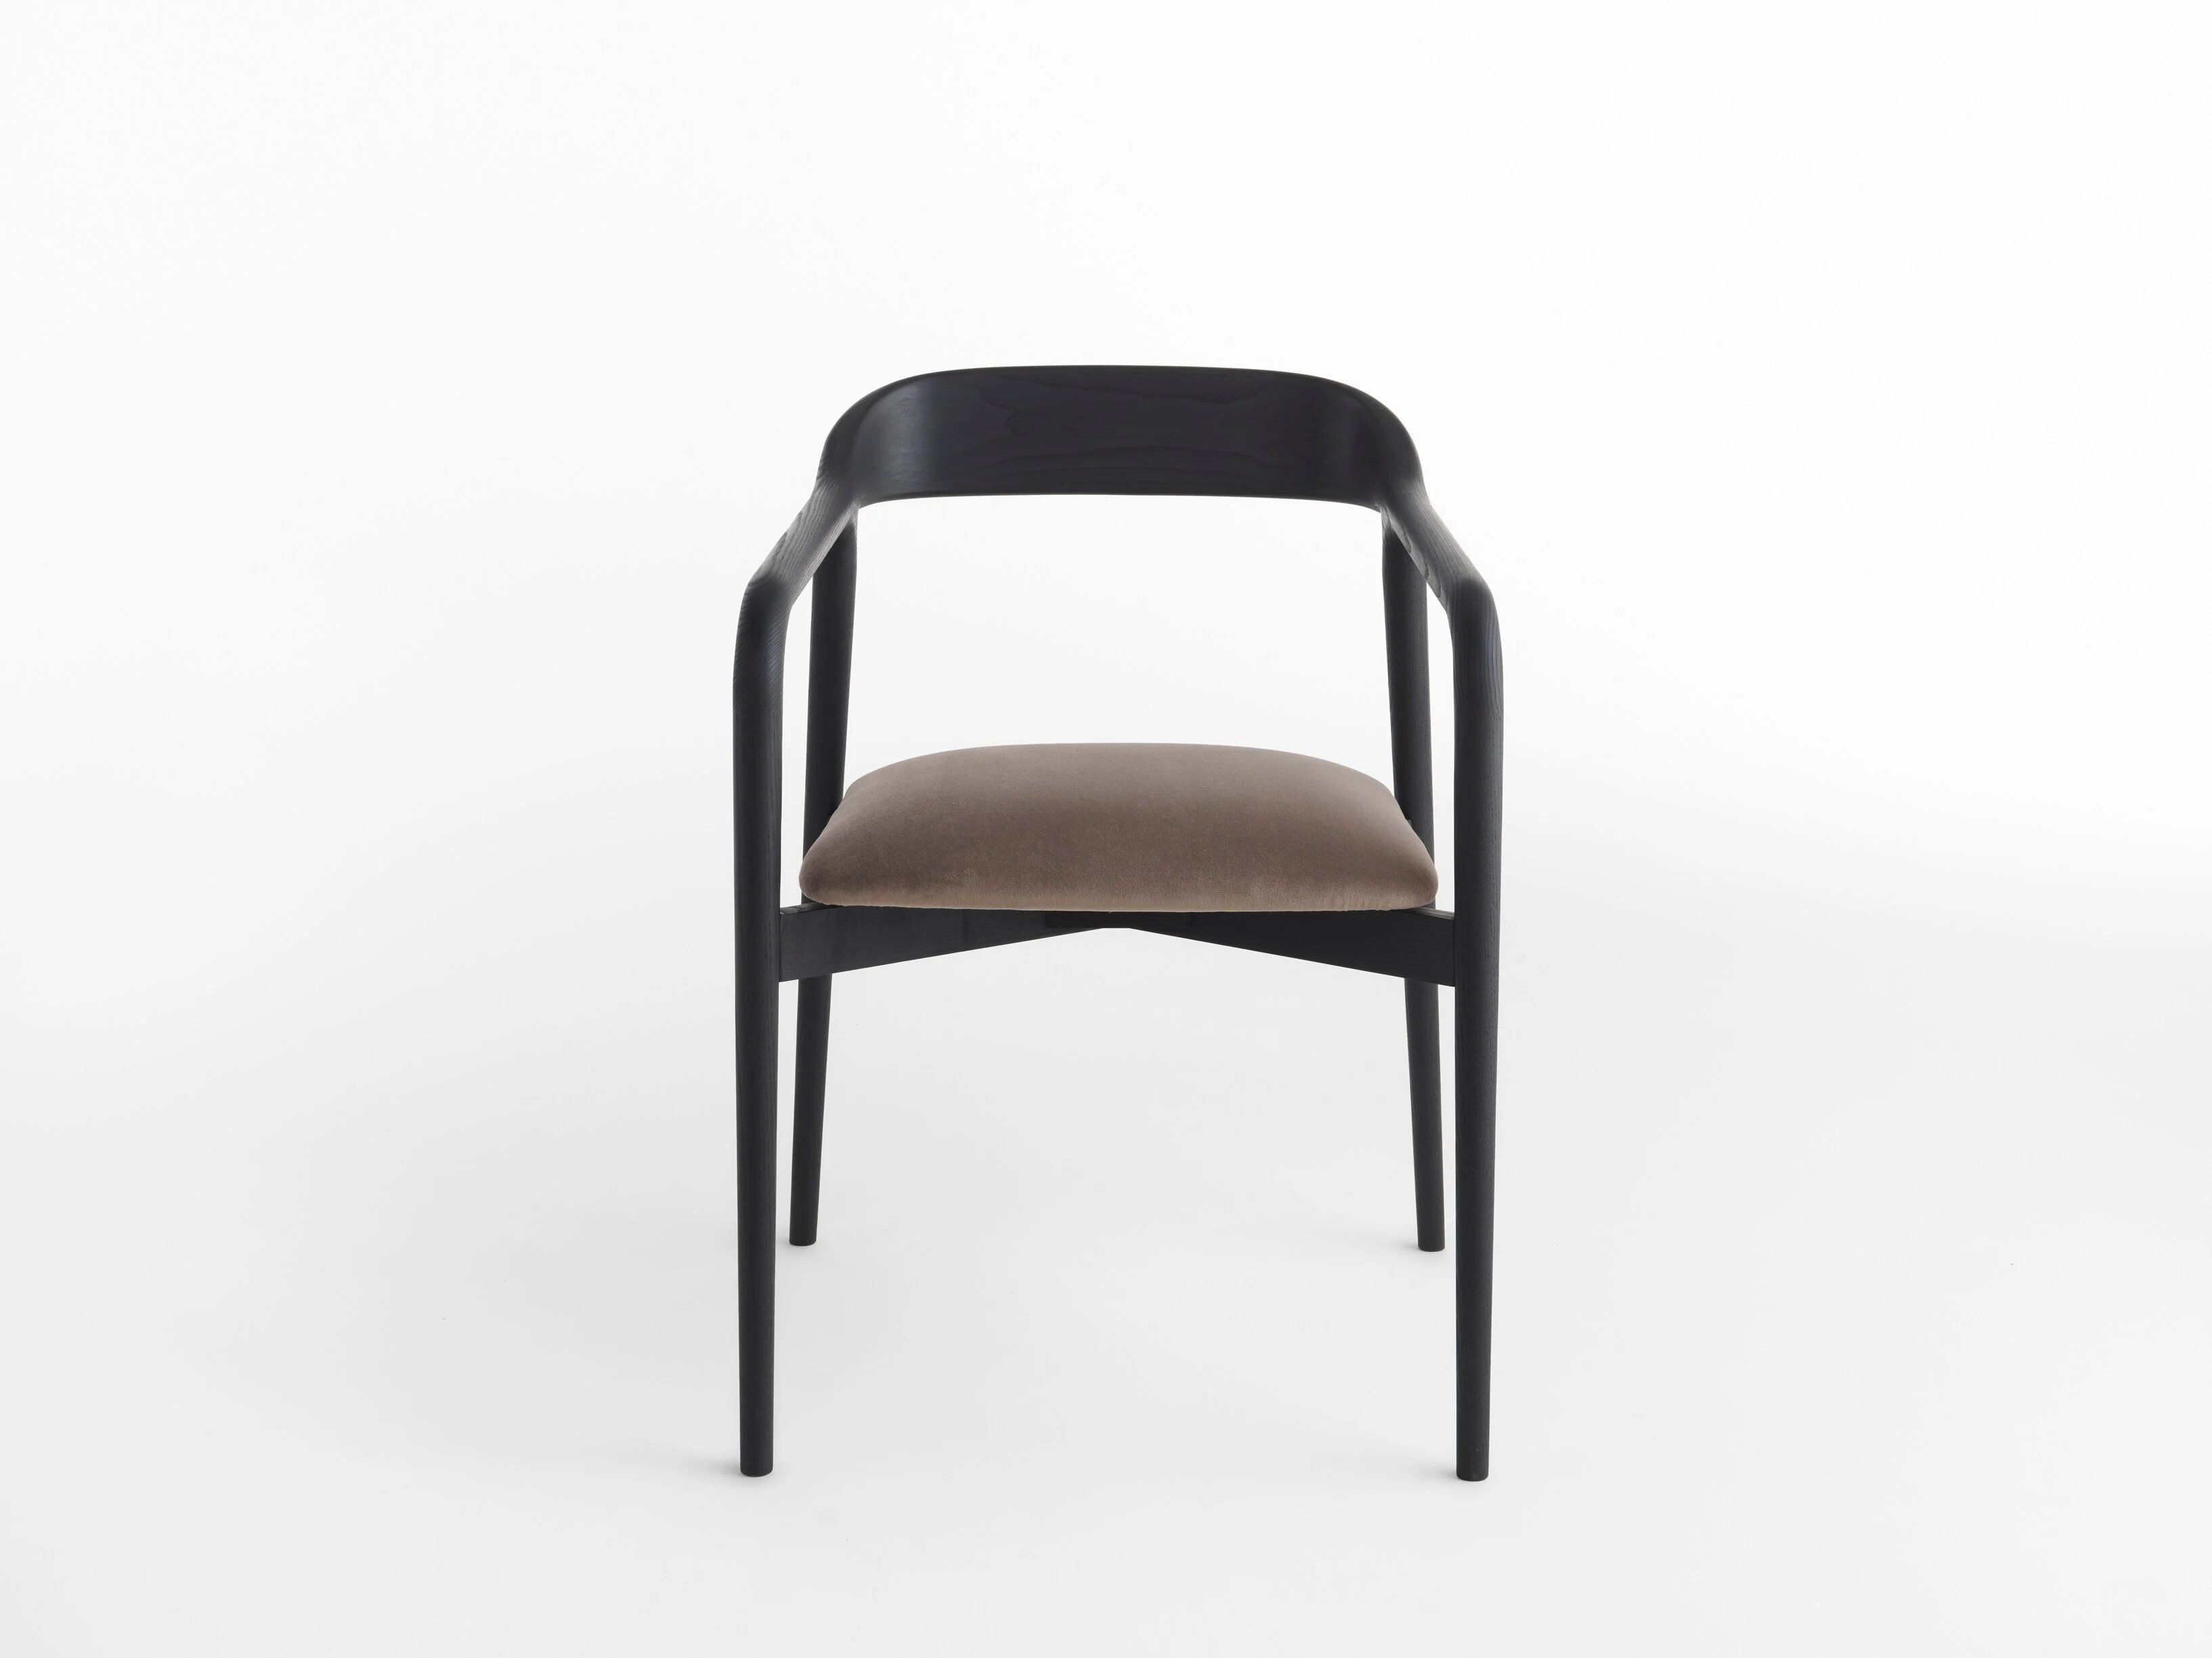 VELASCA chair by Casamania & Horm